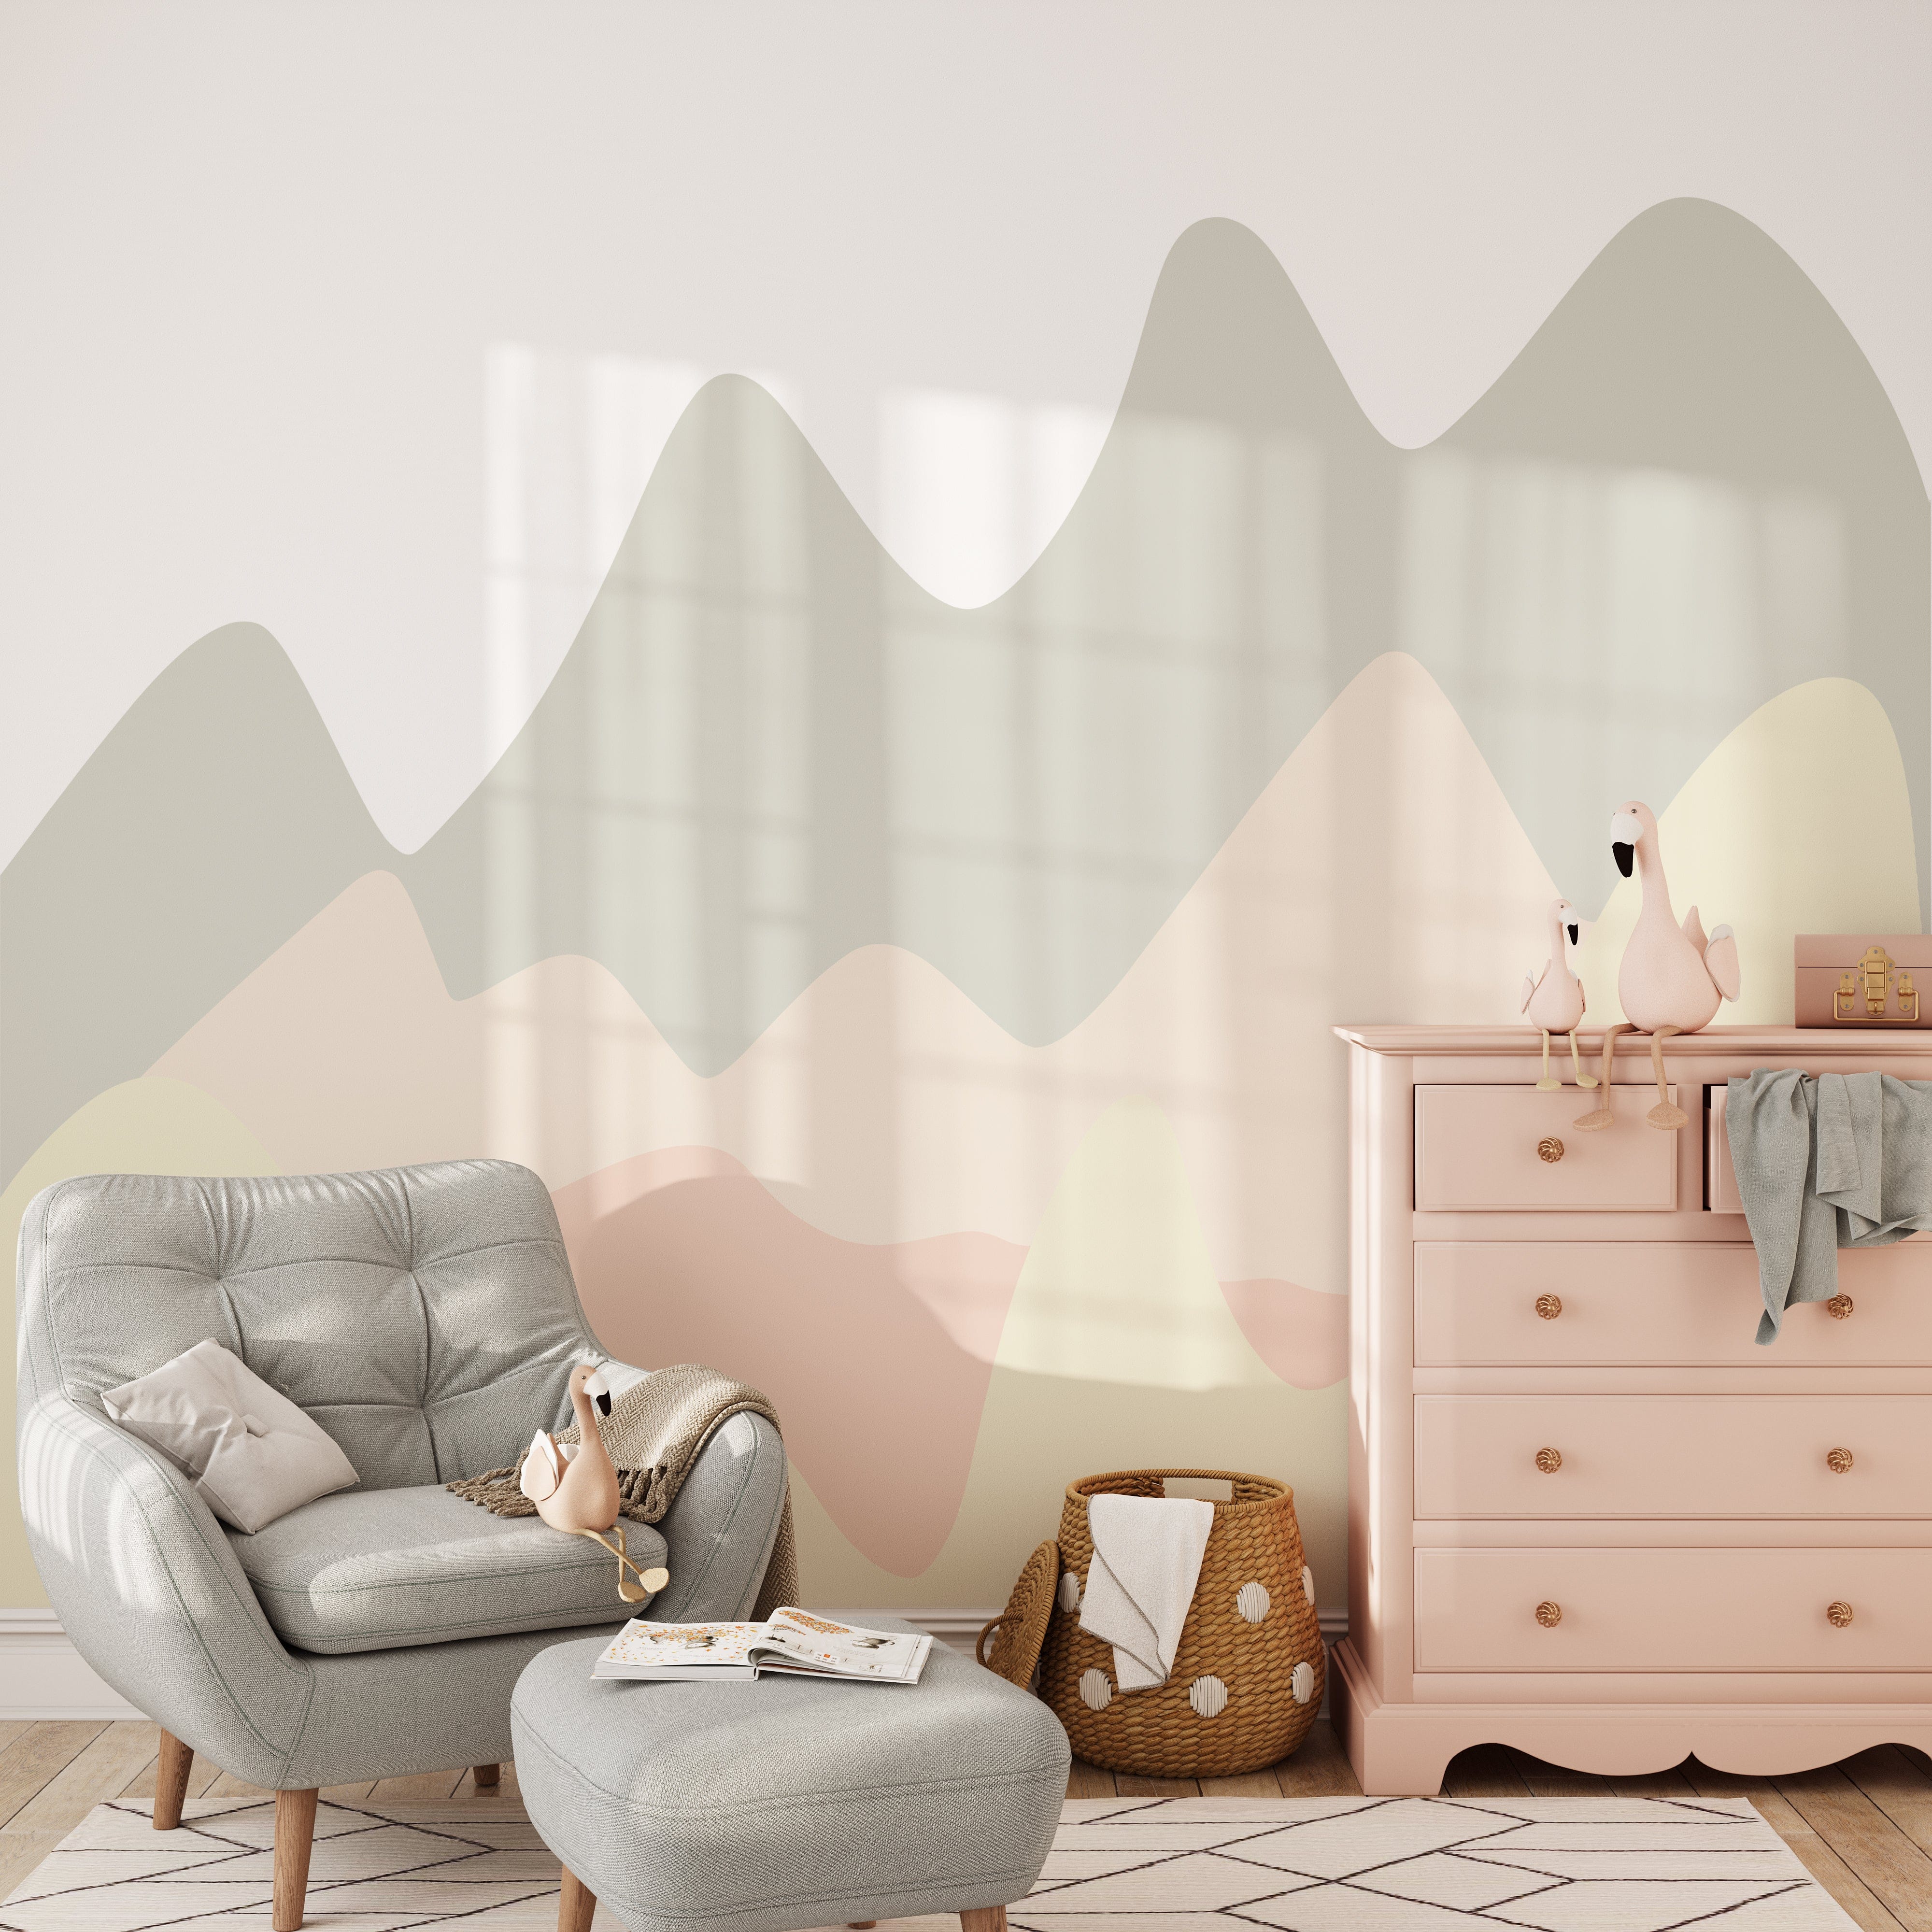 Pastel Hills Mural in a modern nursery setting with a gray armchair, a pink dresser, and decorative plush birds. The mural features wavy pastel hills in calming shades of green, pink, and beige.